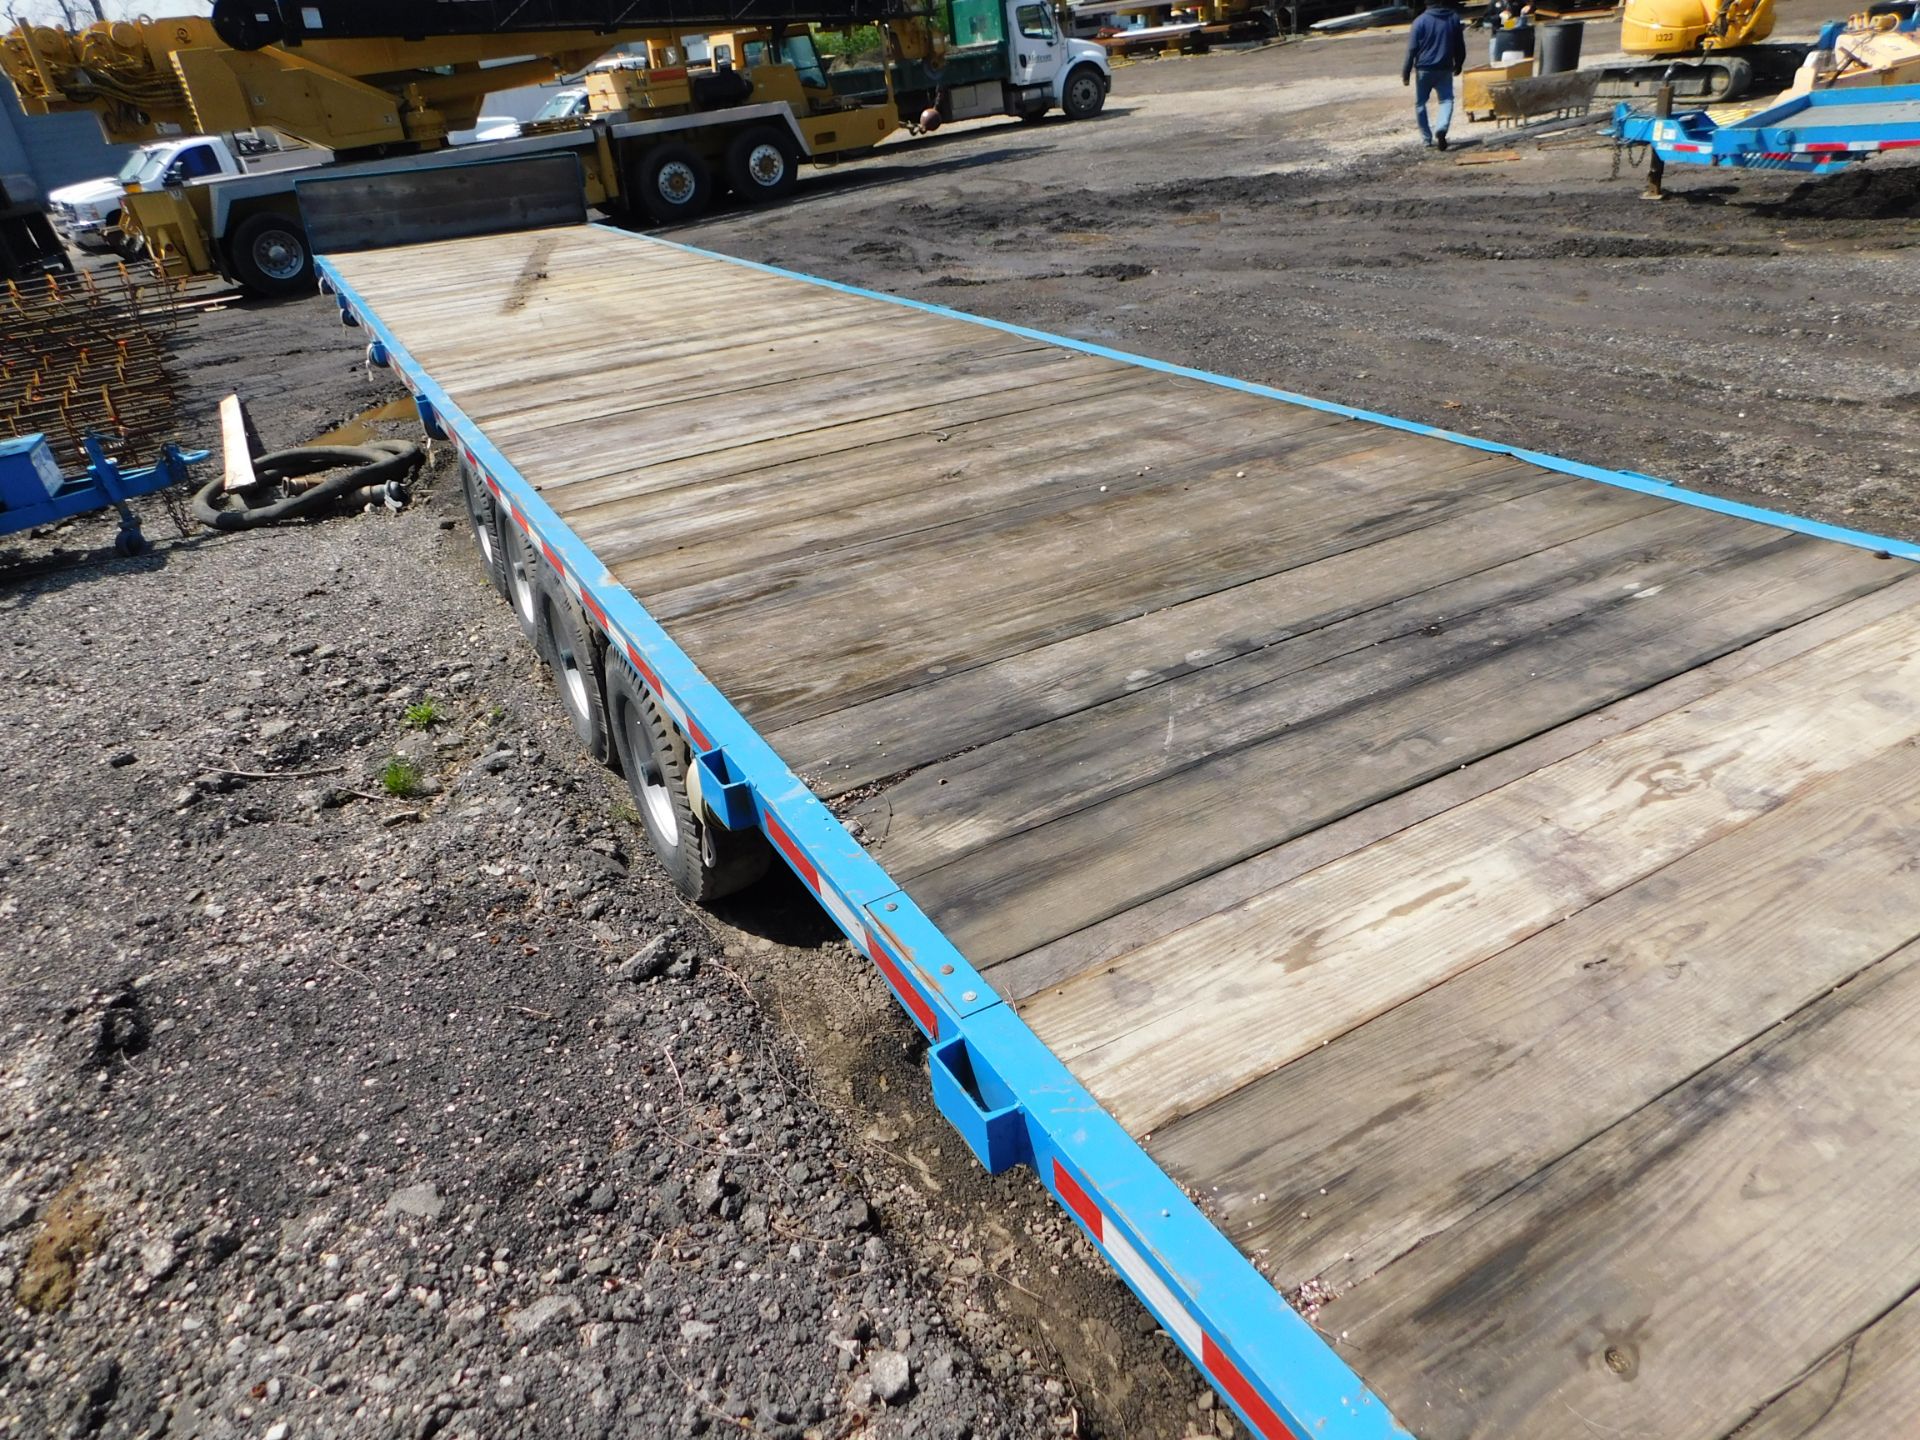 8' x 40' Flat Bed Tongue Pull Trailer, Wood Deck, Quad-Axle, 8-Wheels, Pintle Hitch - Image 6 of 11